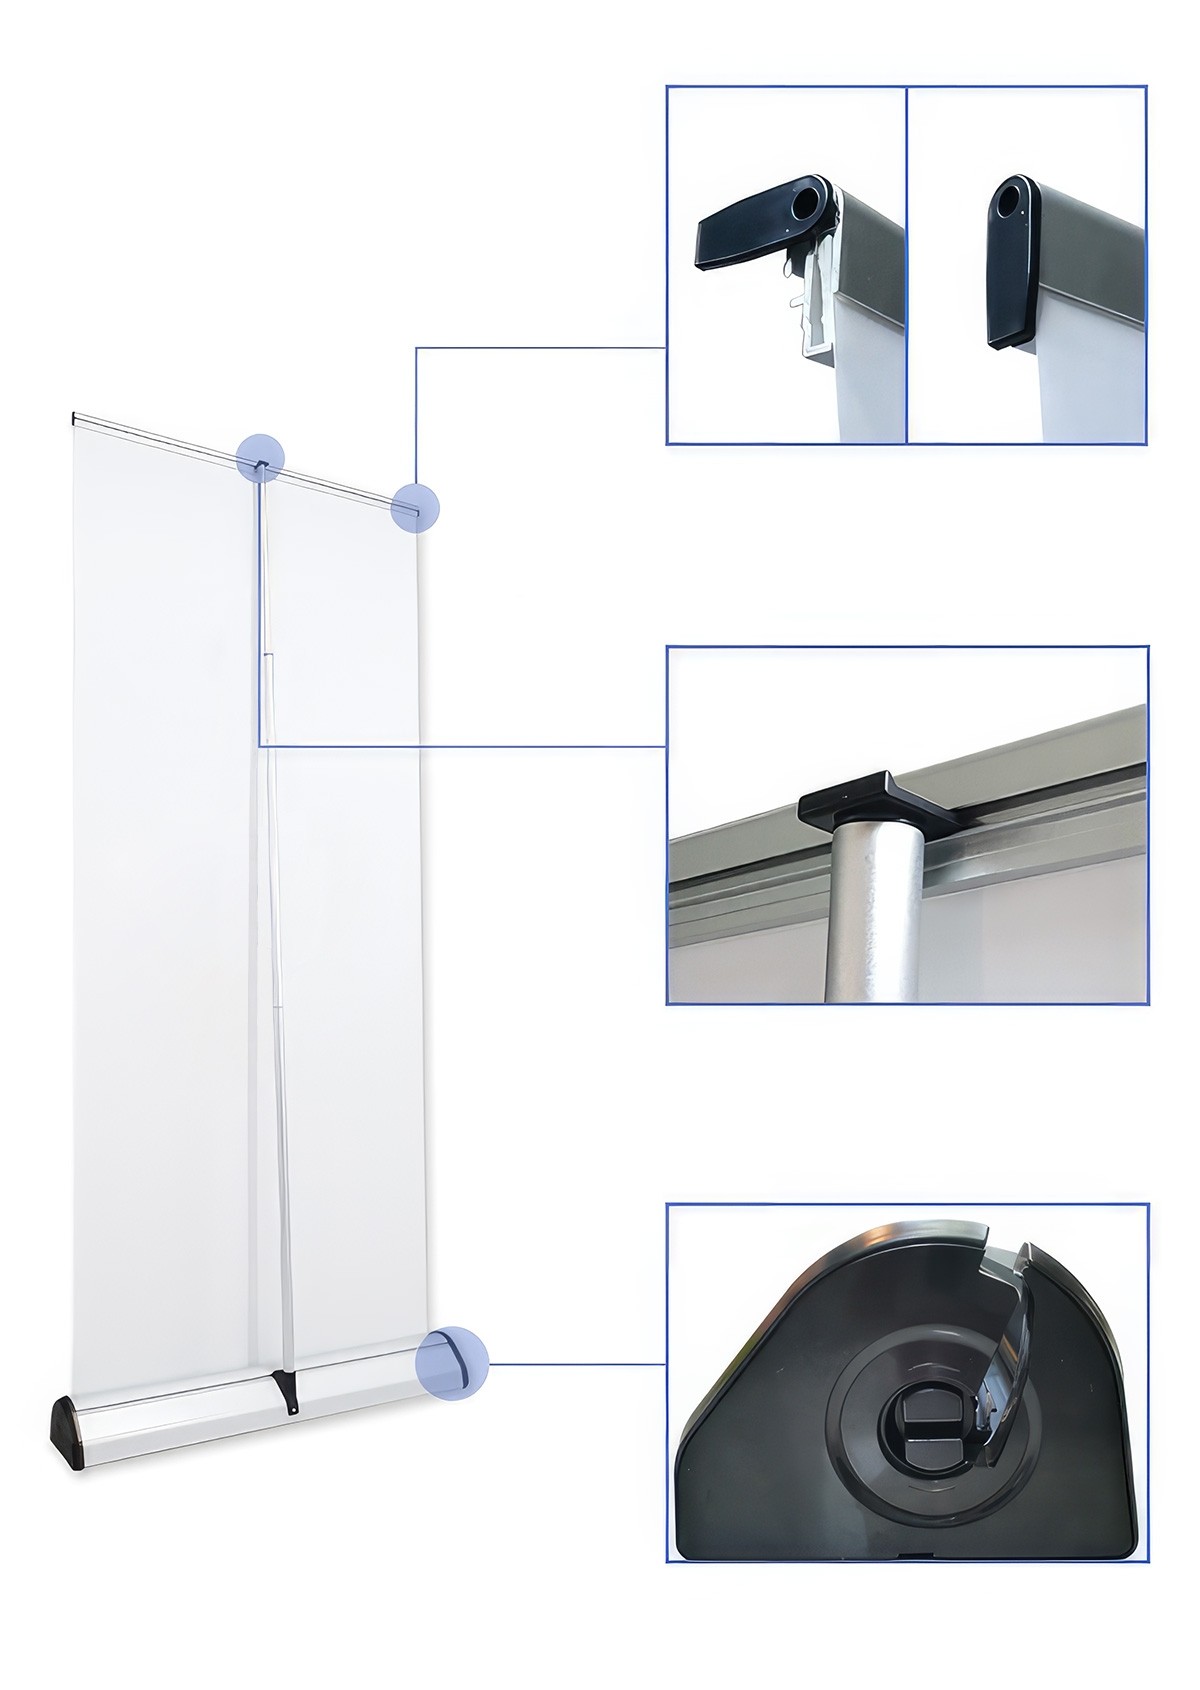 Lock & Roll 33 Retractable Banner Stand